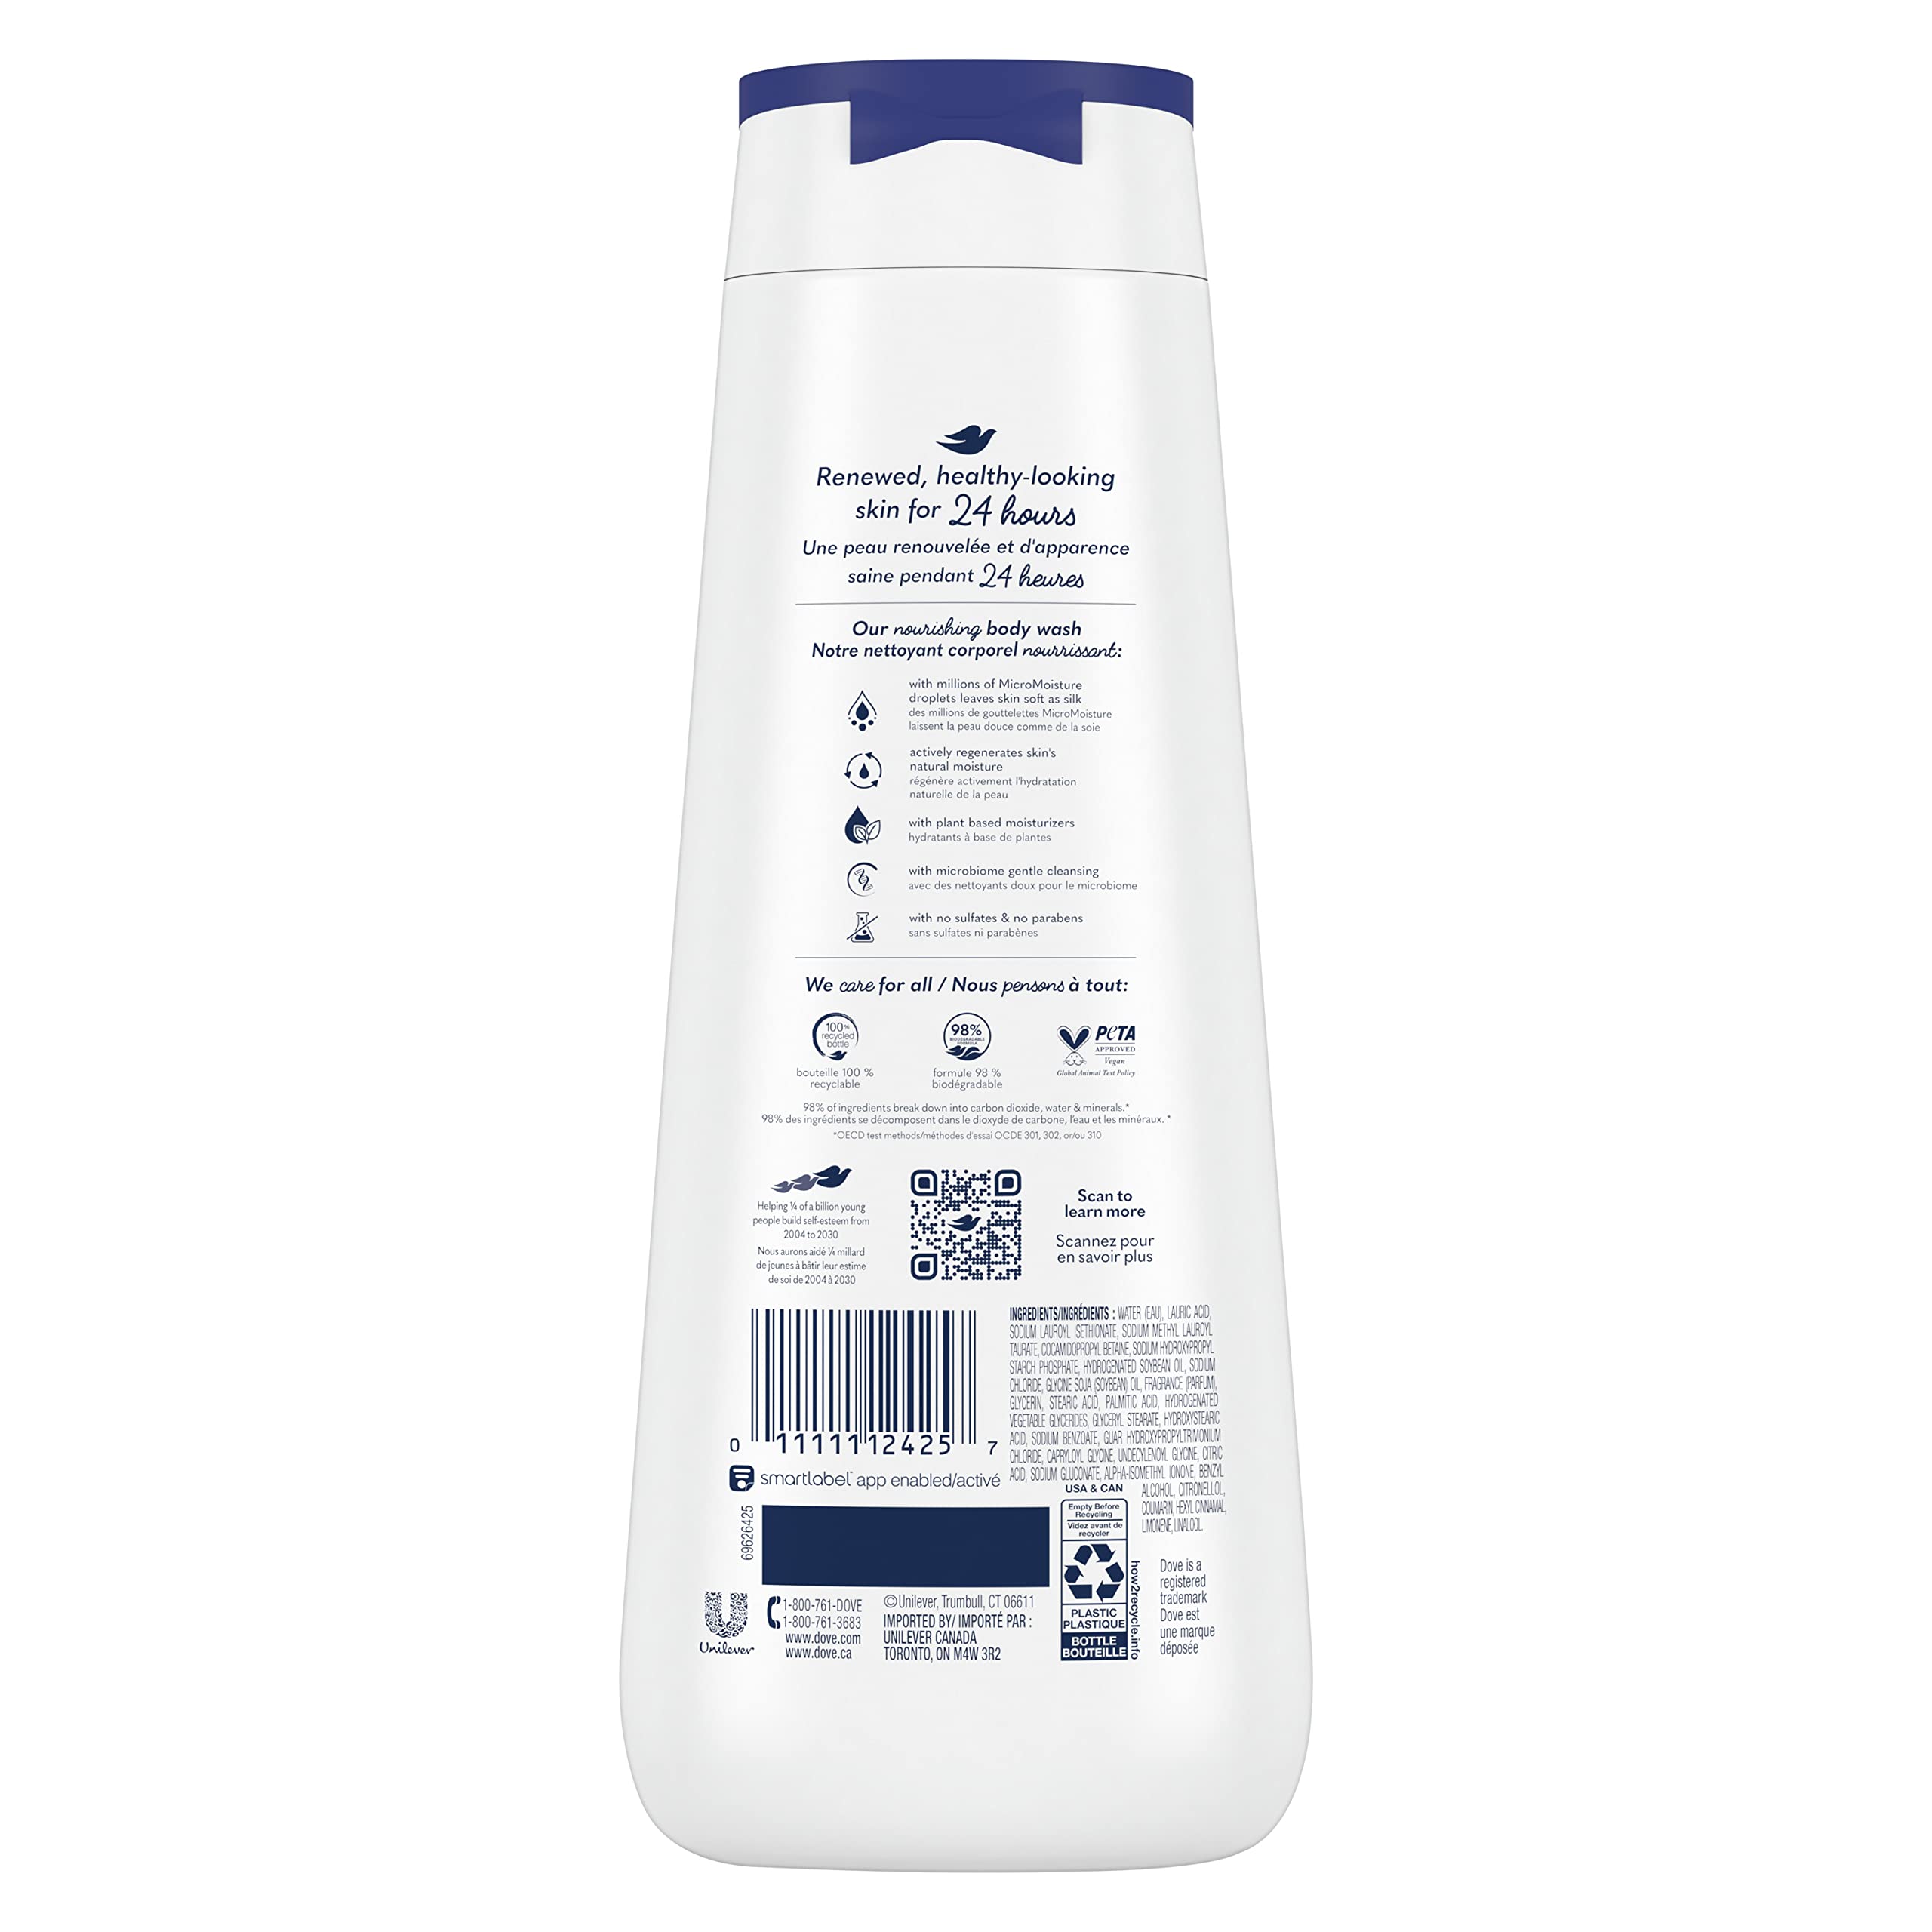 Dove Body Wash For Dry Skin Deep Moisture Moisturizing Skin Cleanser with 24hr Renewing MicroMoisture Nourishes The Driest Skin 20 oz